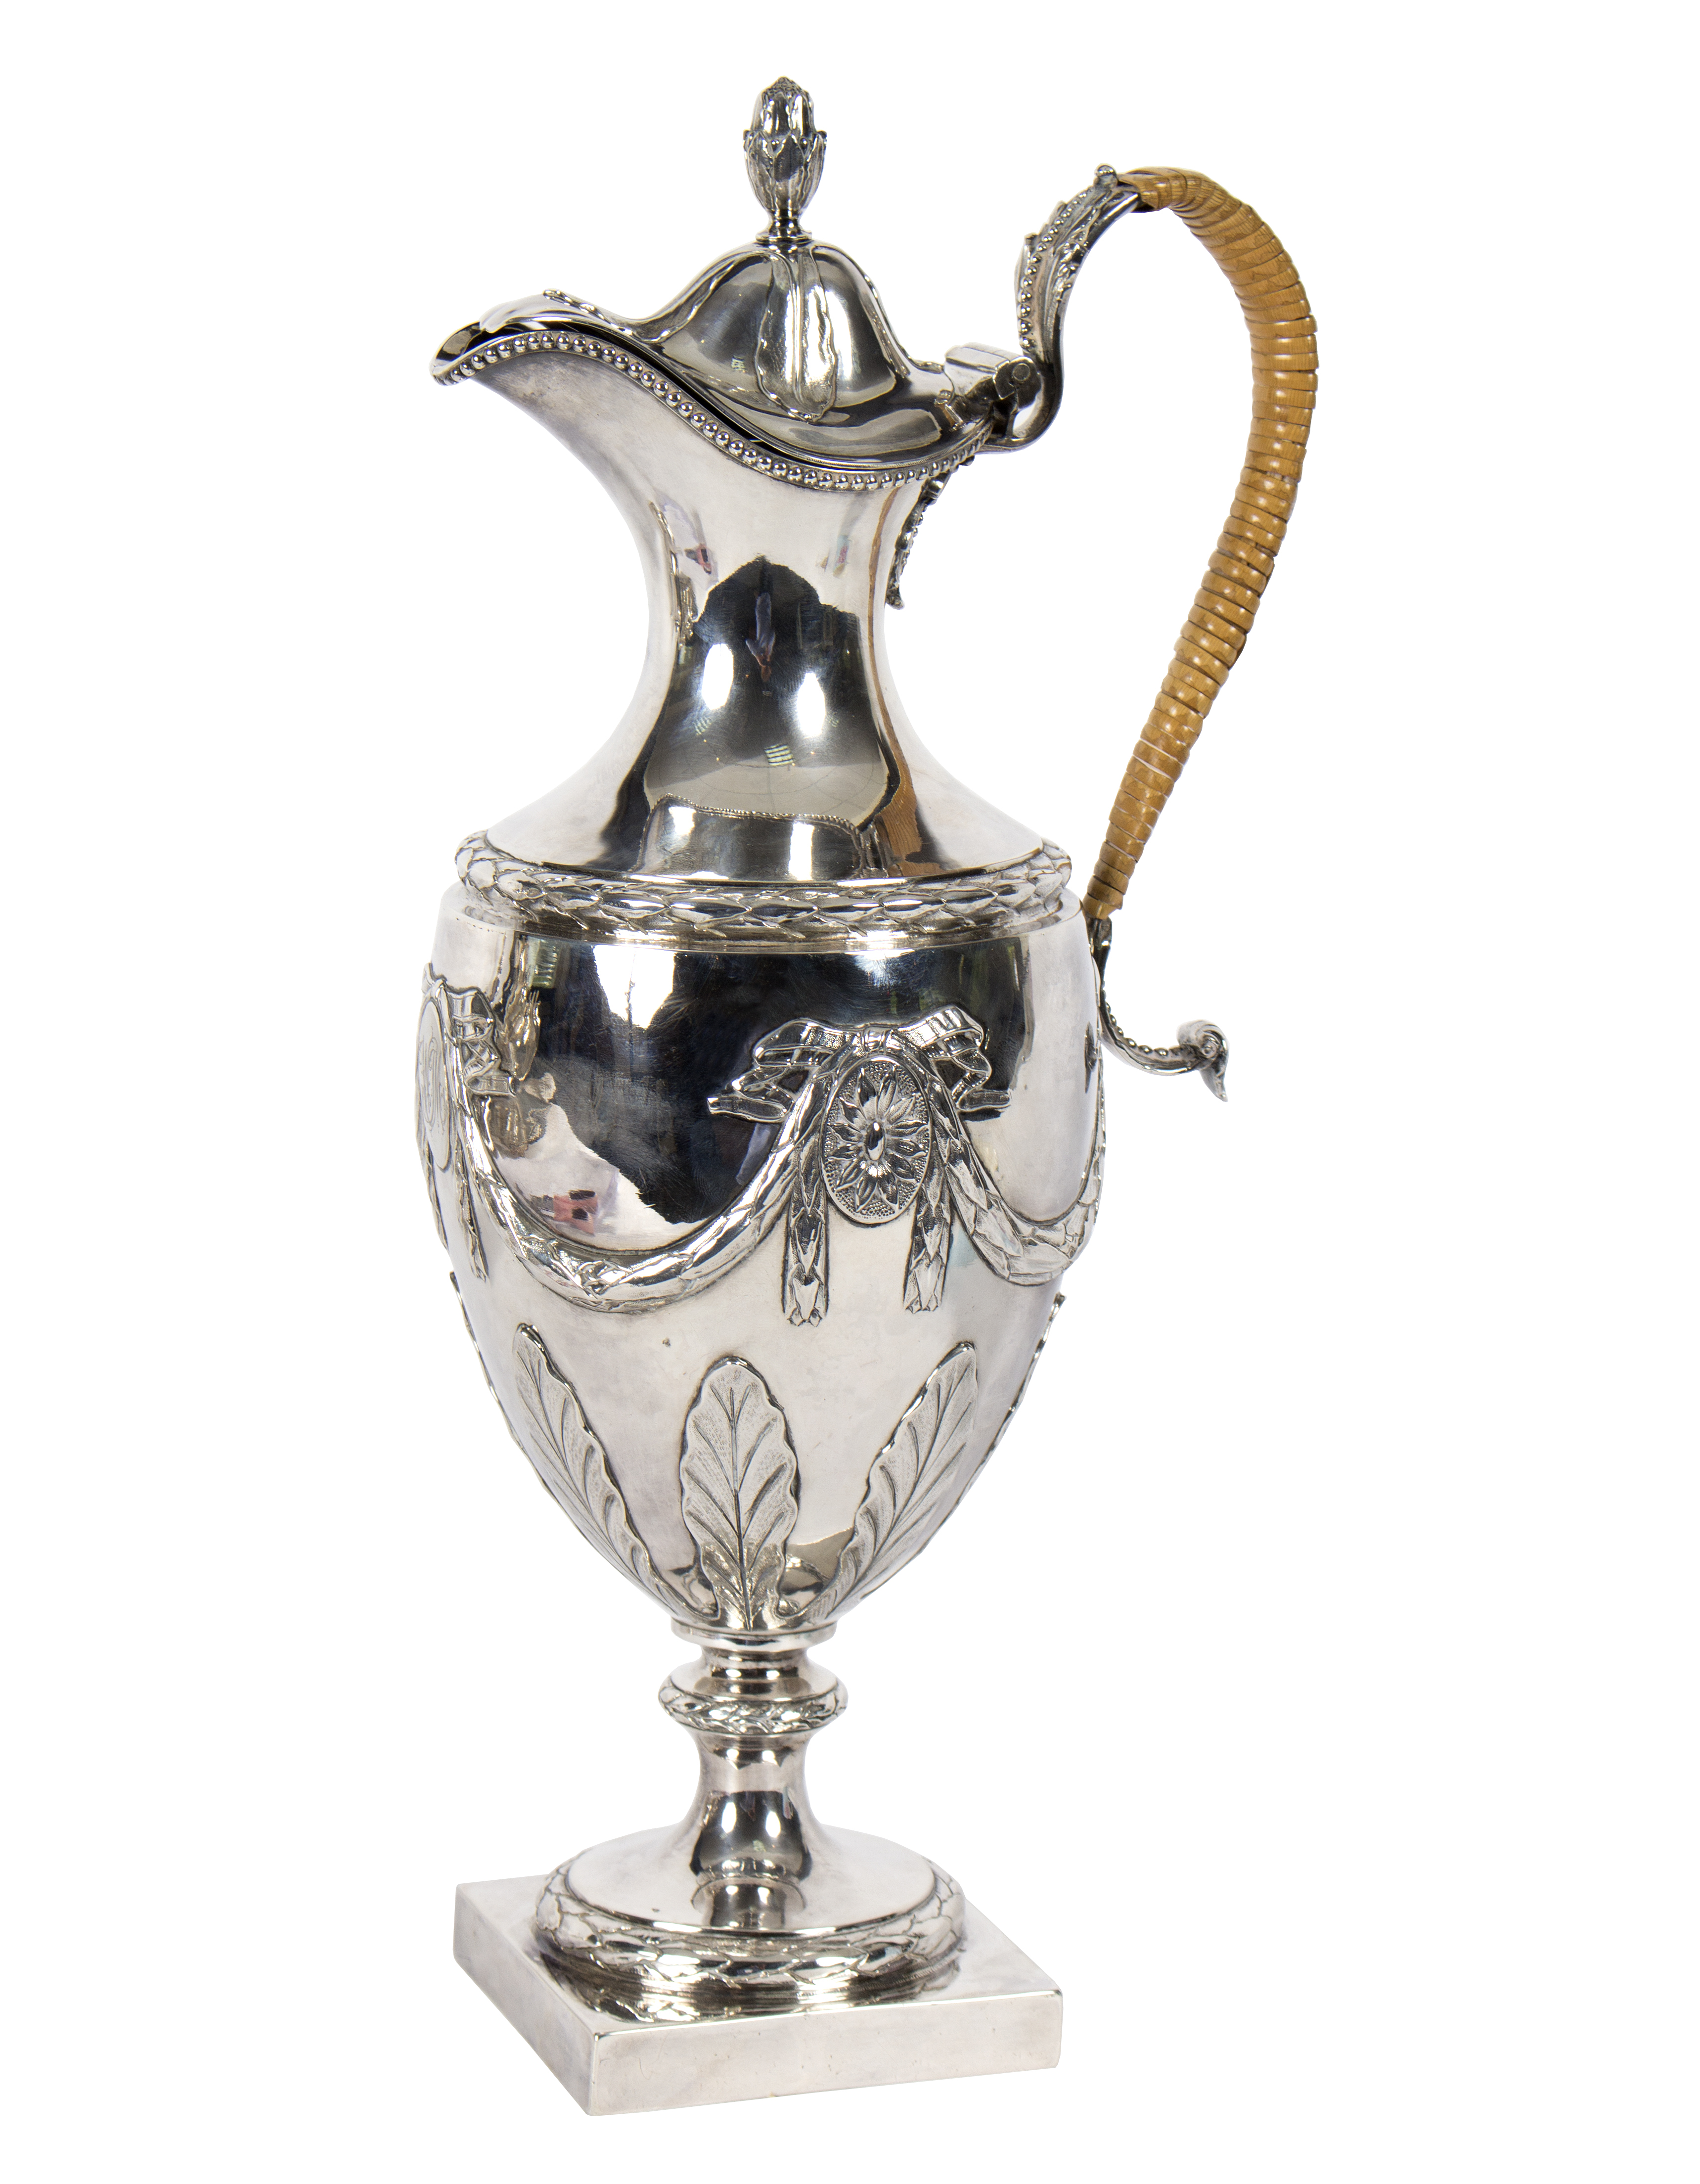 A Georgian silver claret jug, London 1776, decorated with swags, ribbons and acanthus leaves,